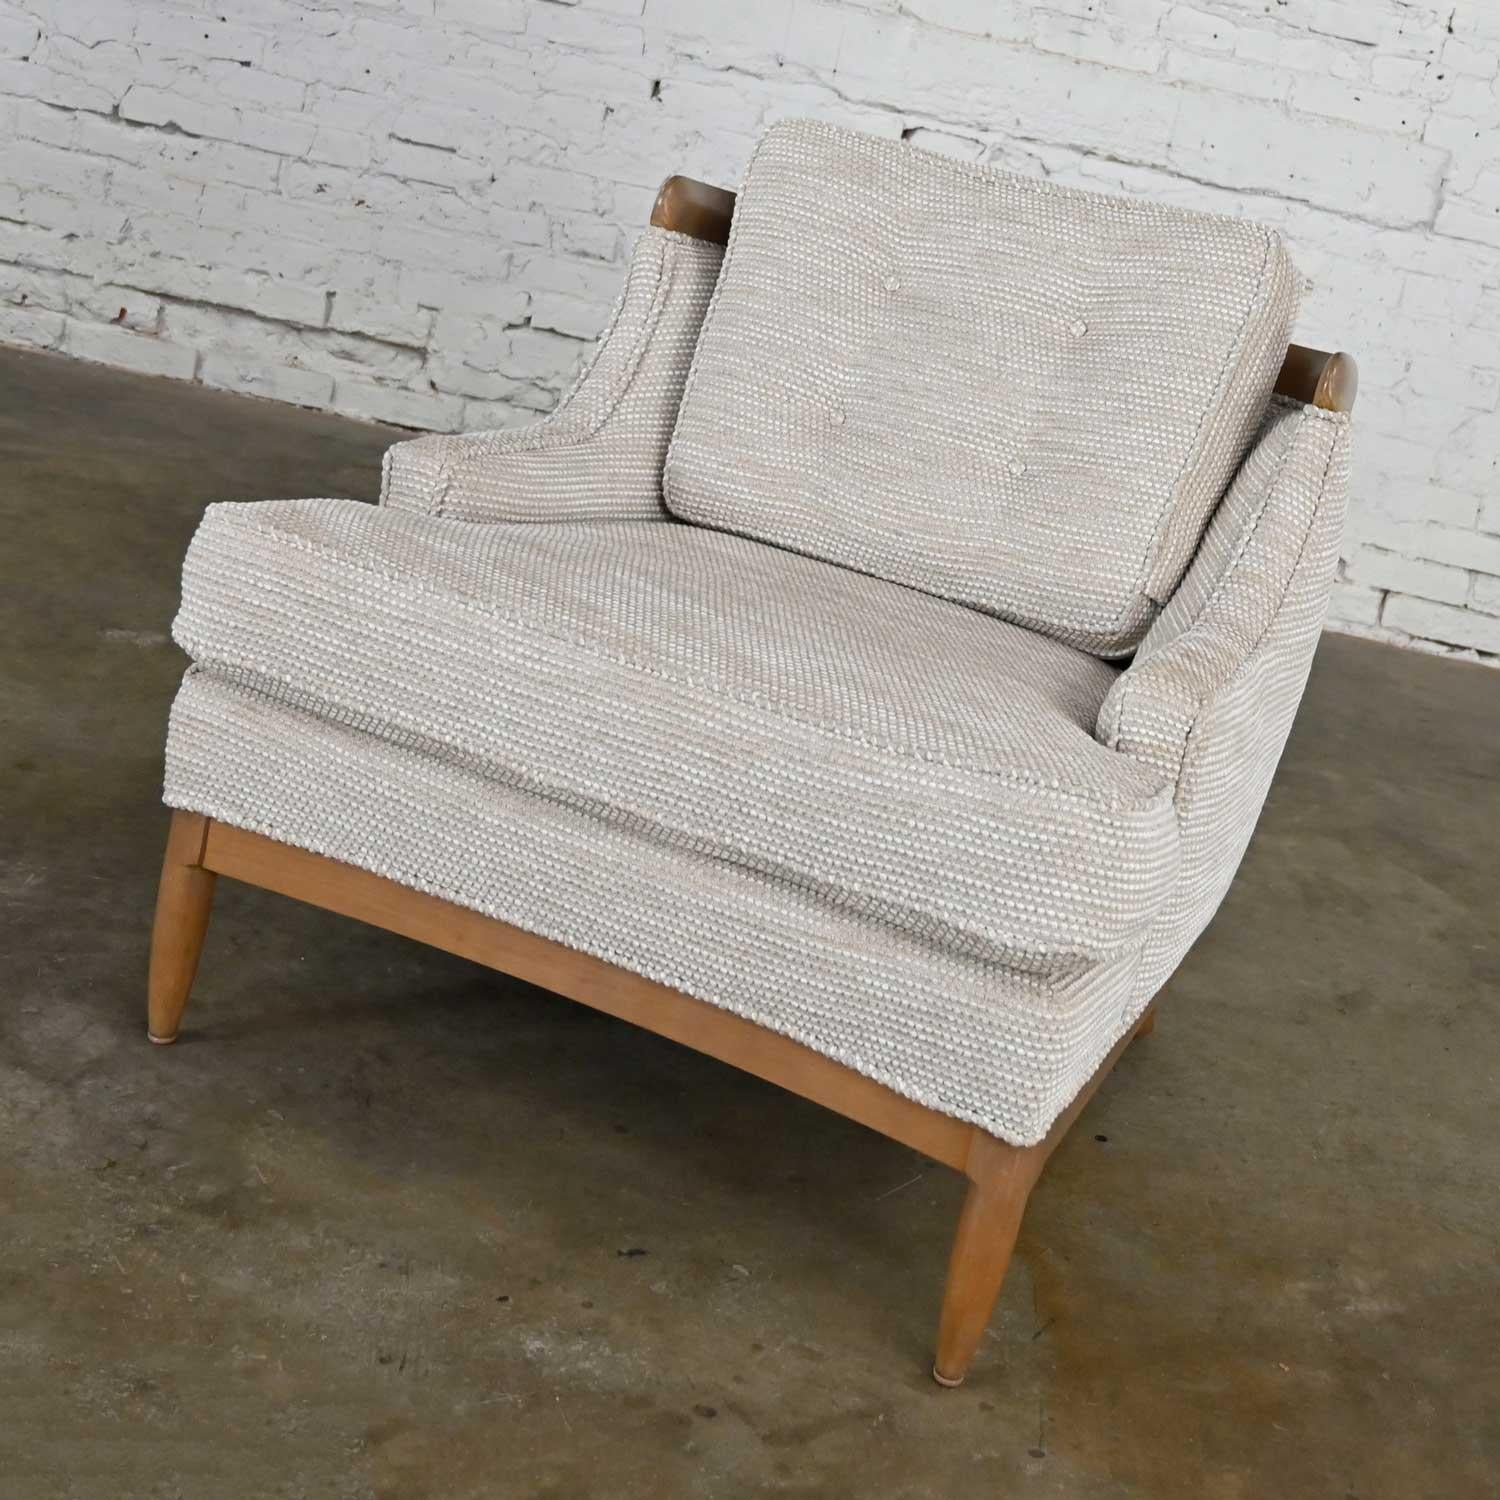 Stunning vintage Mid-Century Modern lounge or club chair attributed to Erwin Lambeth’s Sophisticate collection comprised of light hardwood with a cerused finish & reupholstered in an Italian off-white chenille dot fabric called Zamba by Matthew